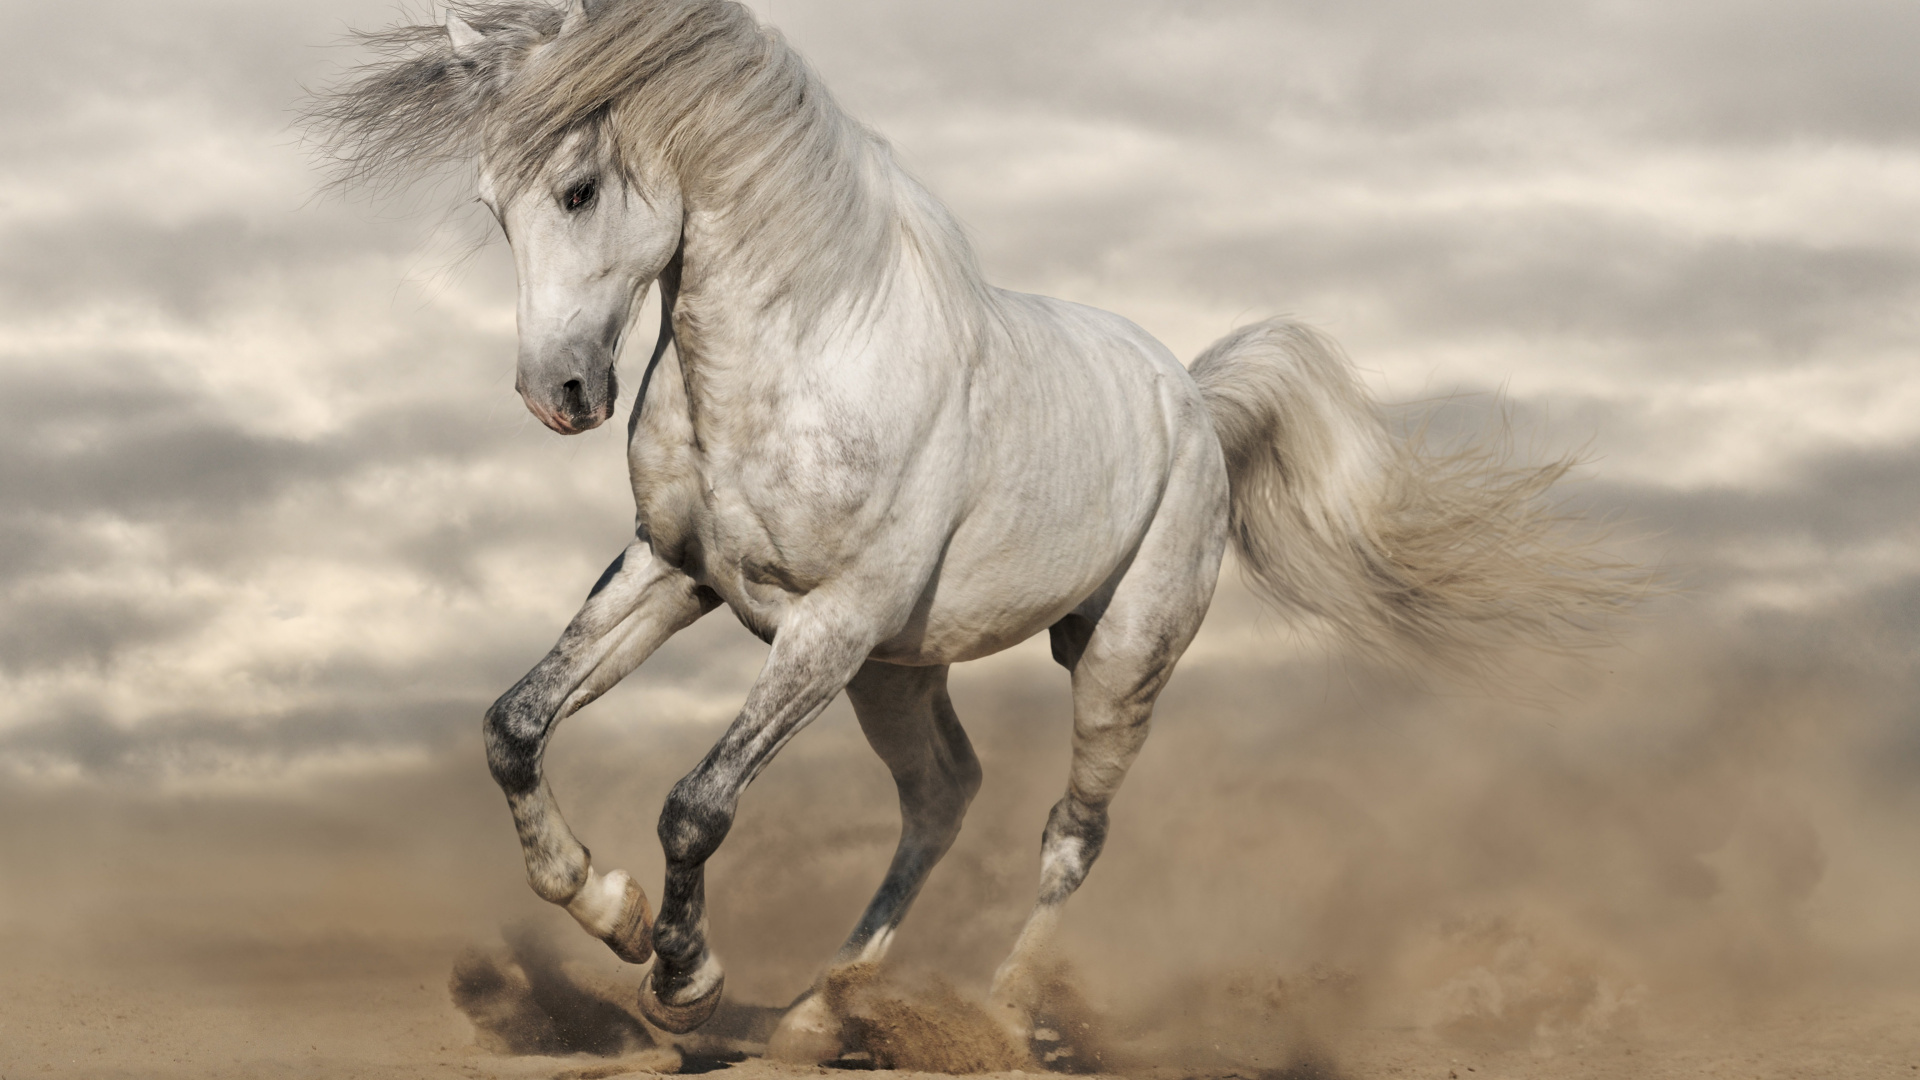 White Horse Running on Brown Sand During Daytime. Wallpaper in 1920x1080 Resolution